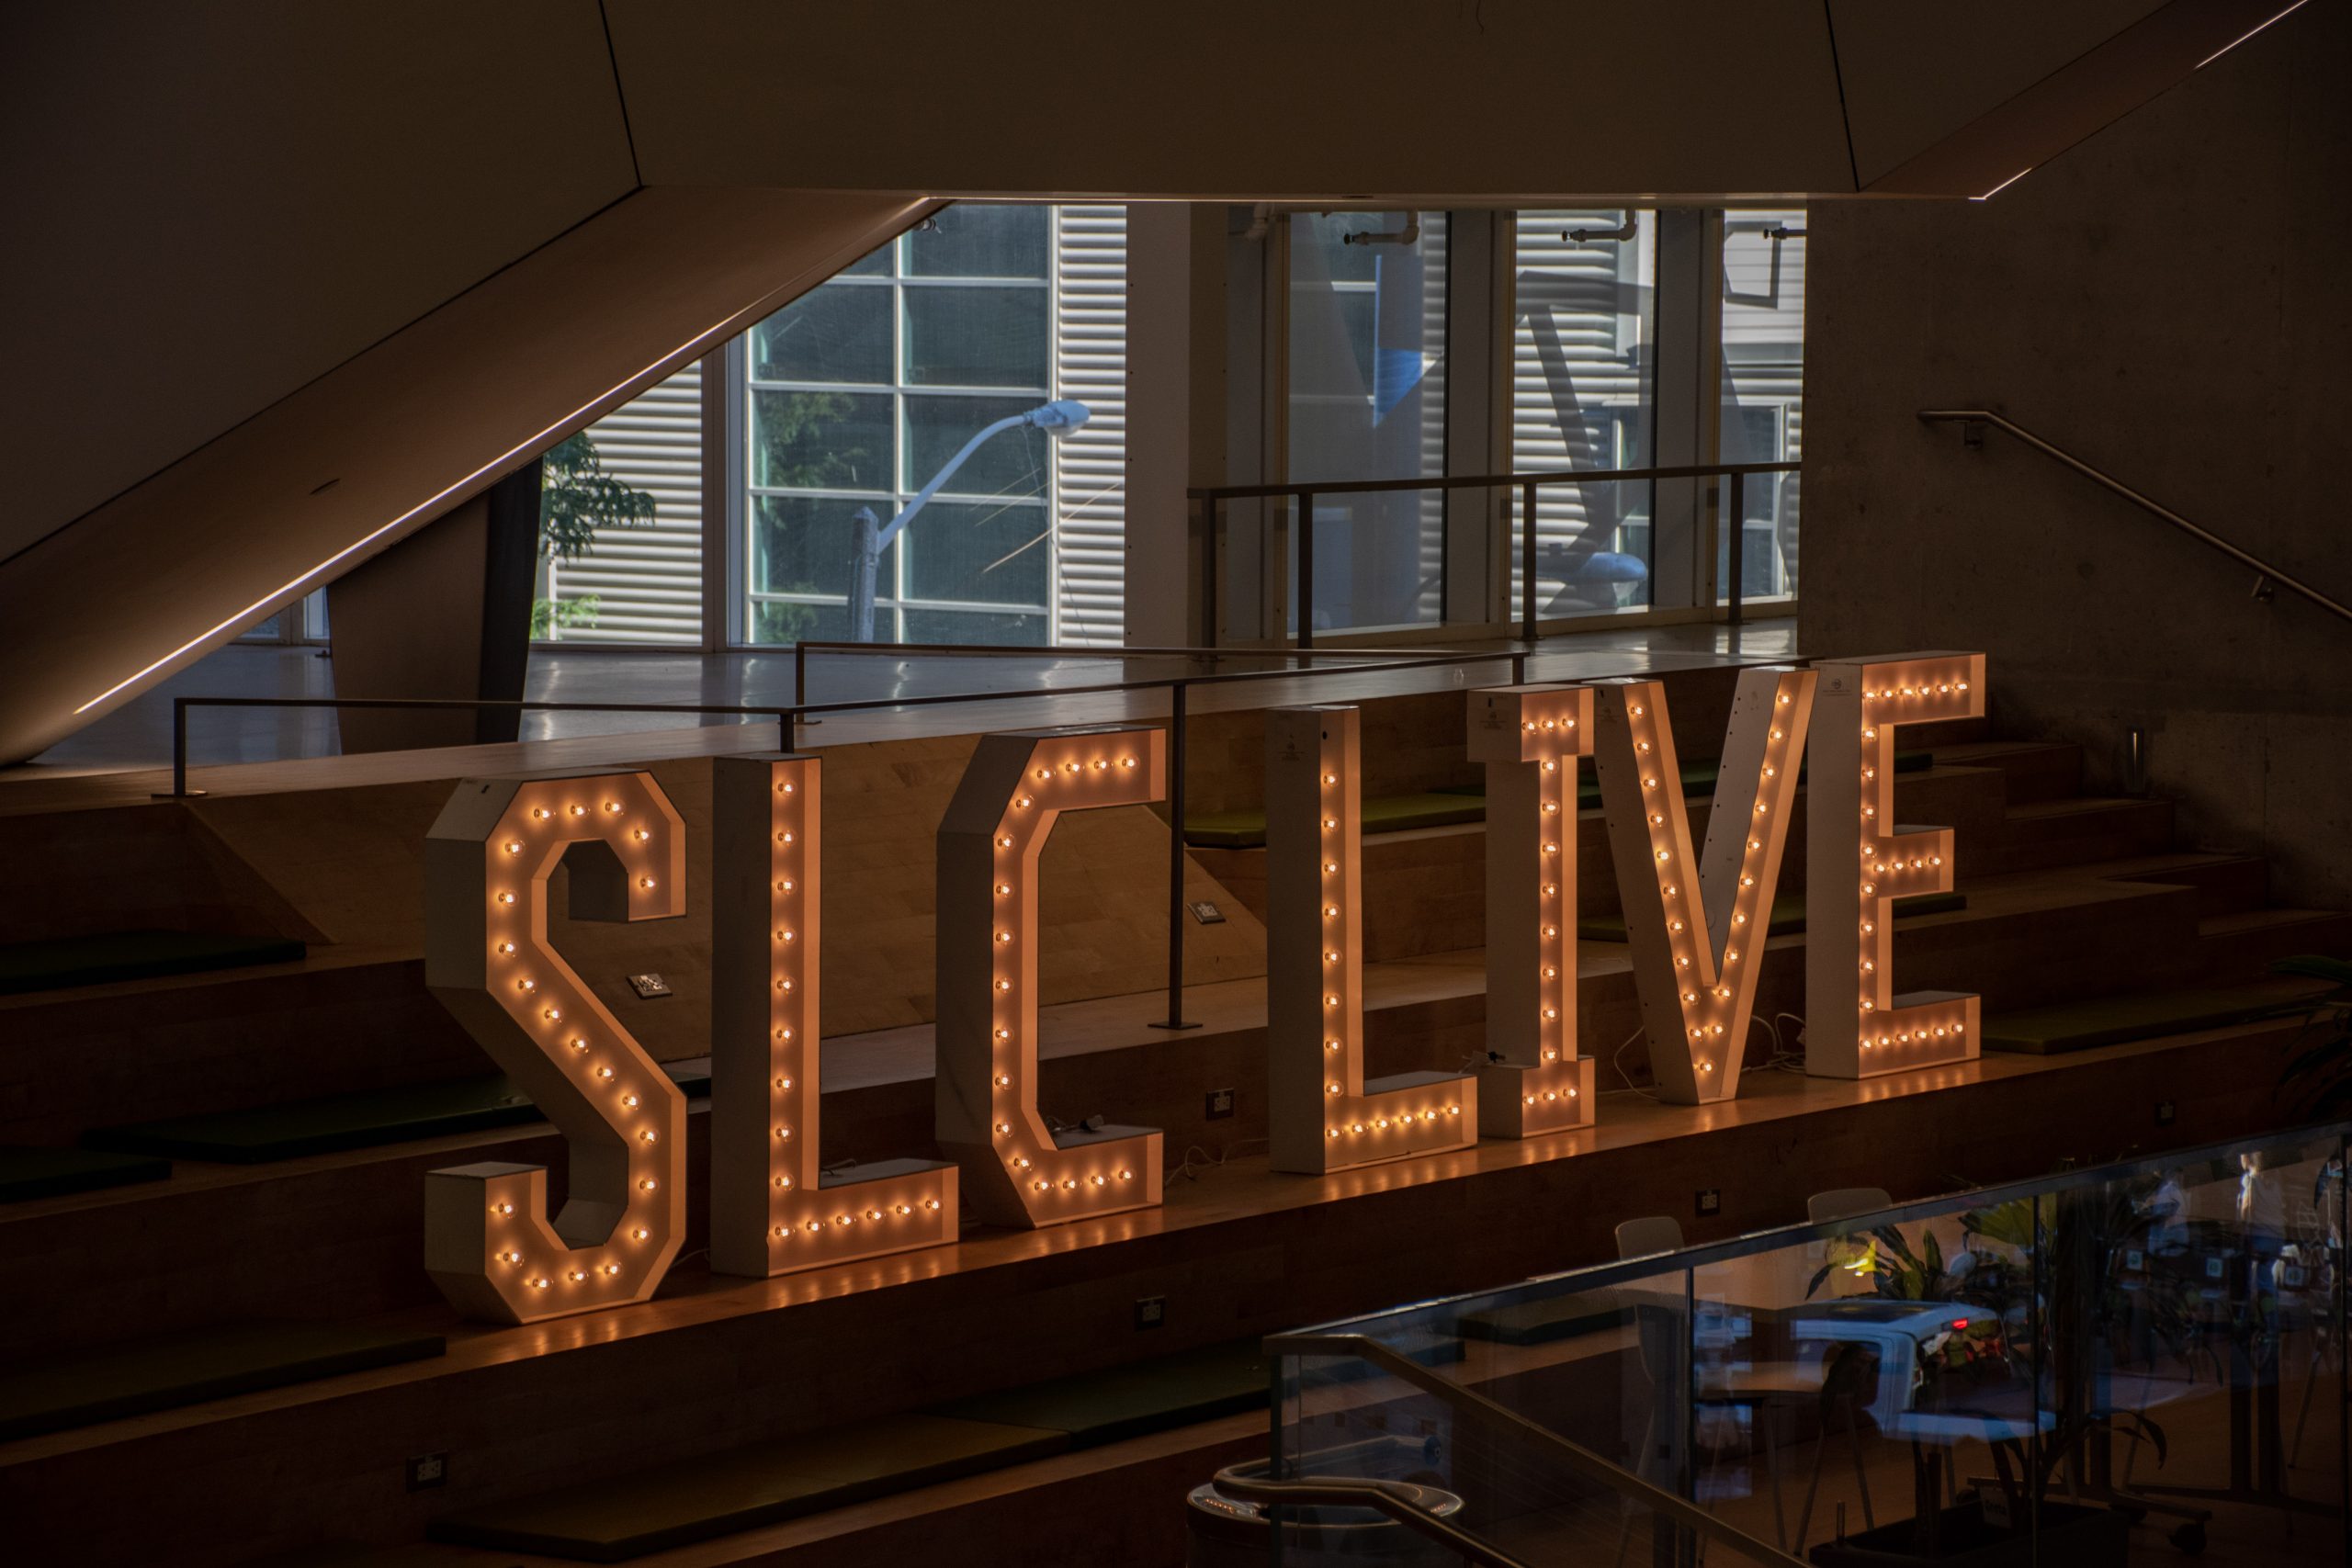 big letters spelling out "SLC LIVE"